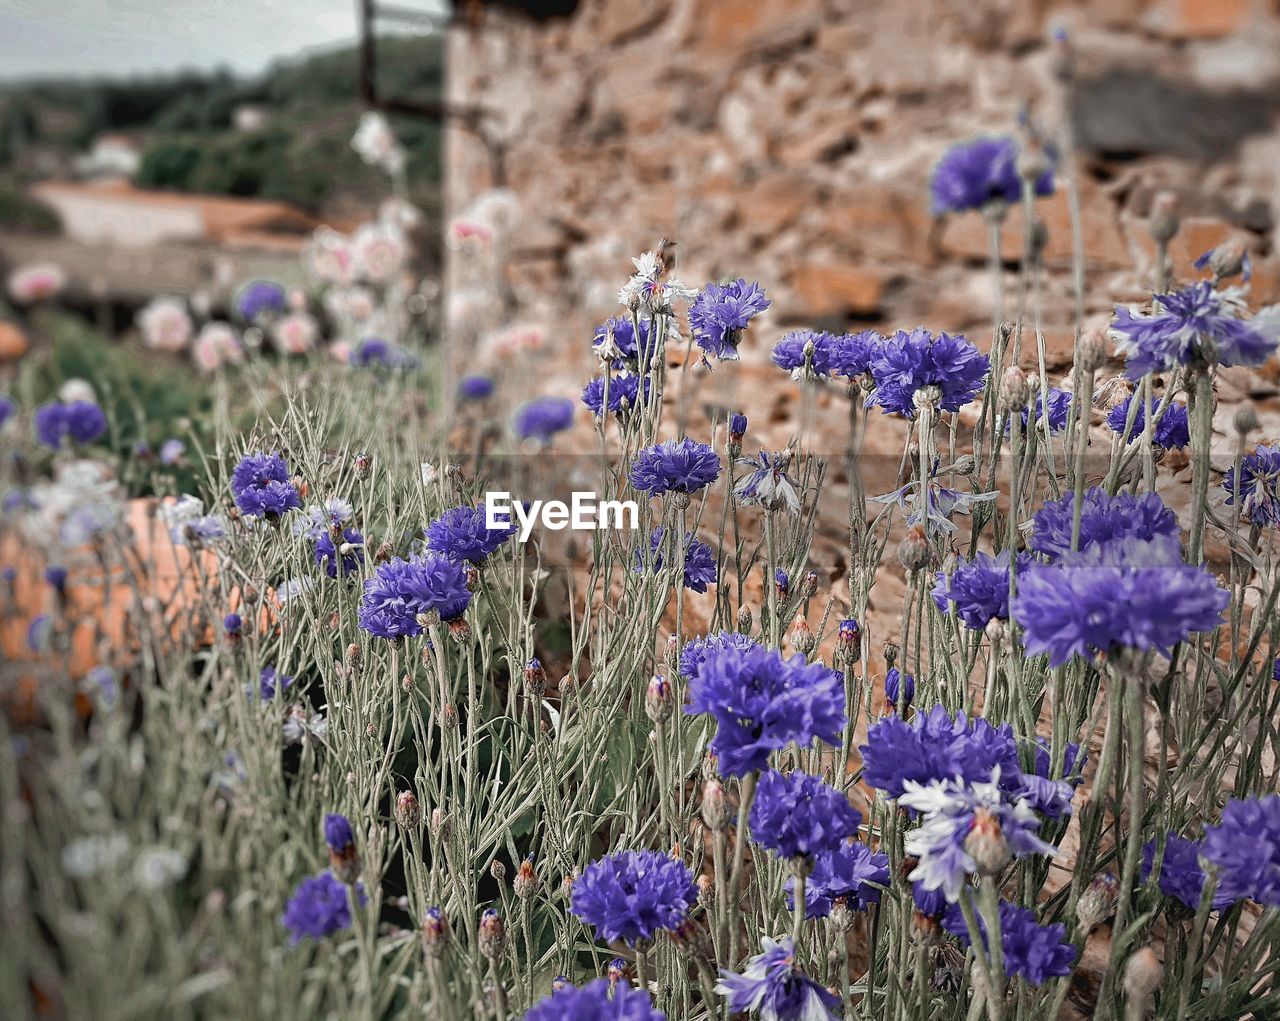 flowering plant, flower, plant, purple, beauty in nature, freshness, growth, fragility, lavender, nature, field, land, no people, close-up, day, wildflower, focus on foreground, selective focus, outdoors, botany, flower head, inflorescence, tranquility